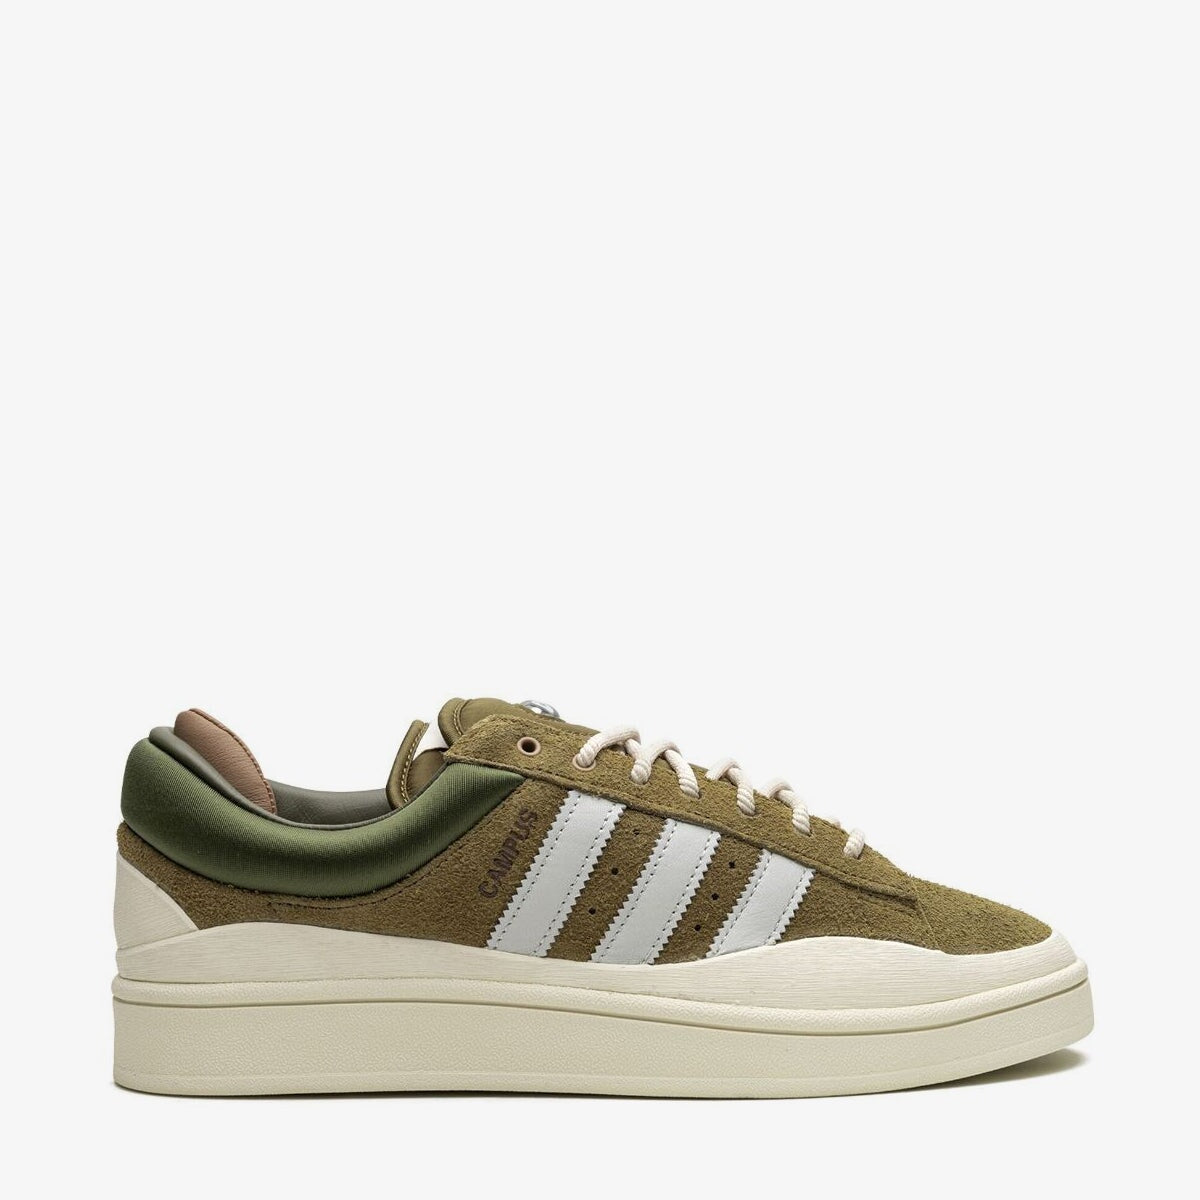 Bad Bunny x Adidas Campus Low “Wild Moss” Sneakers adidas